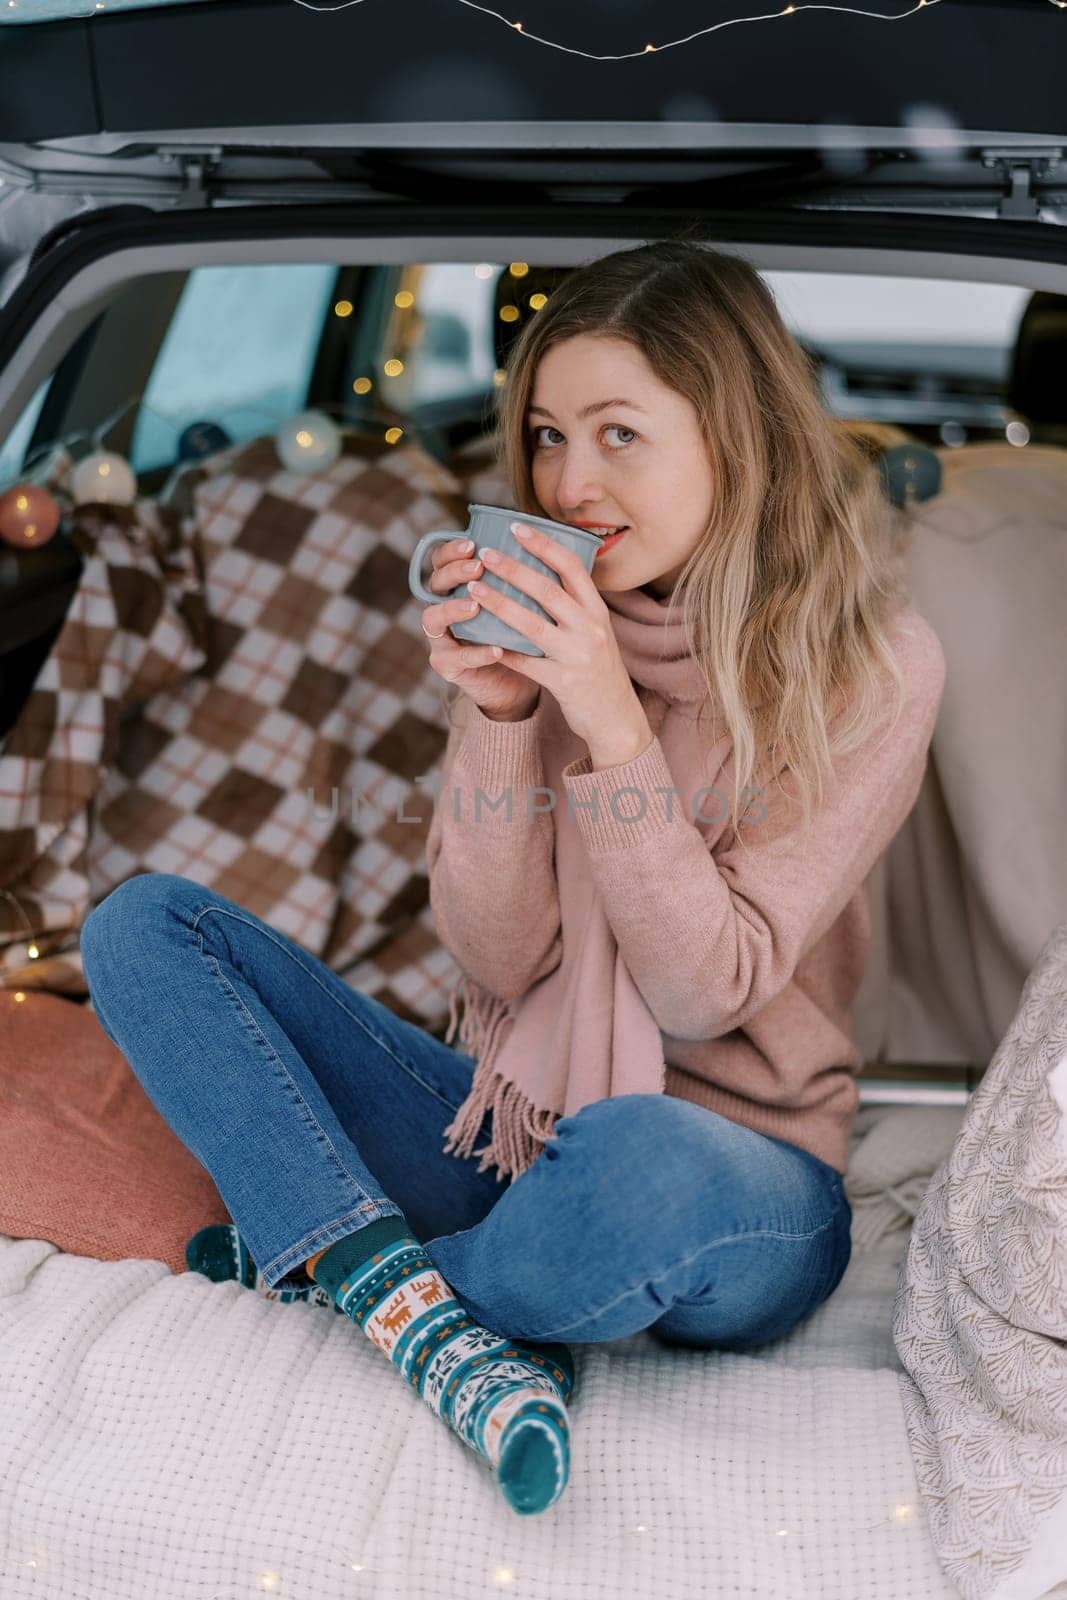 Young woman about to drink coffee while sitting in car trunk looking over cup by Nadtochiy